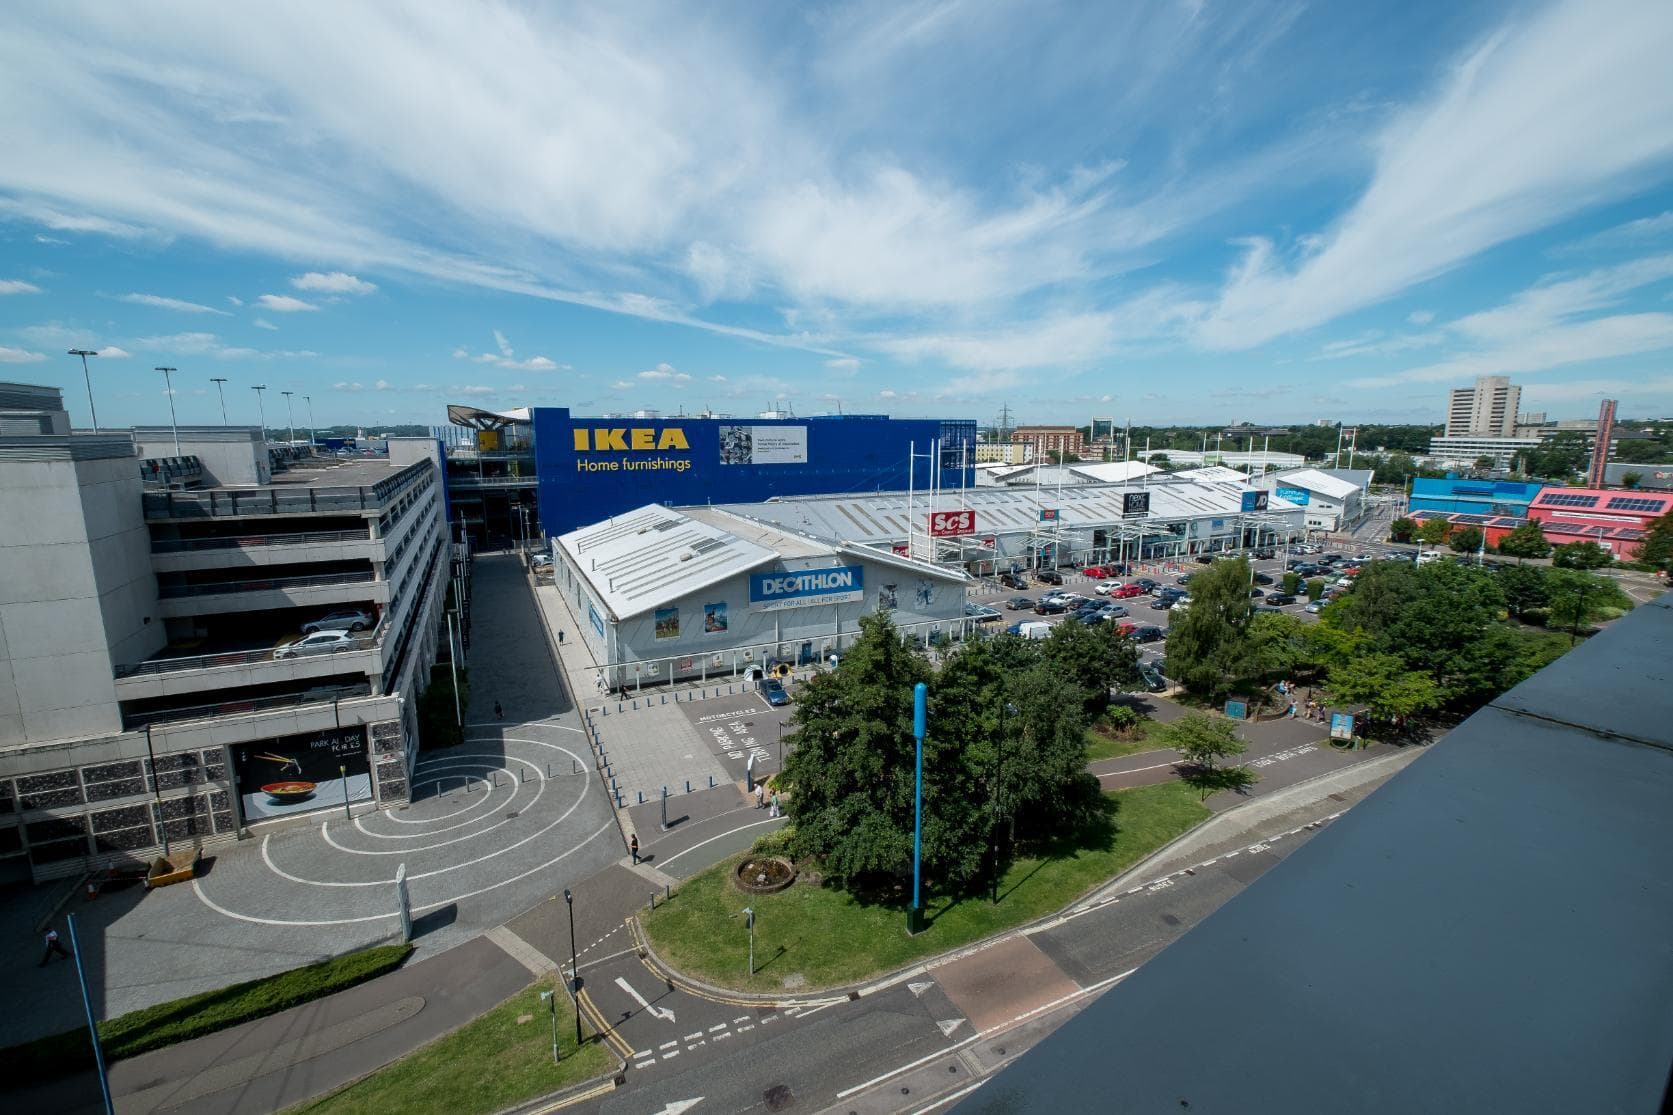 Looking across at Ikea and Westquay Retail Park, Southampton.